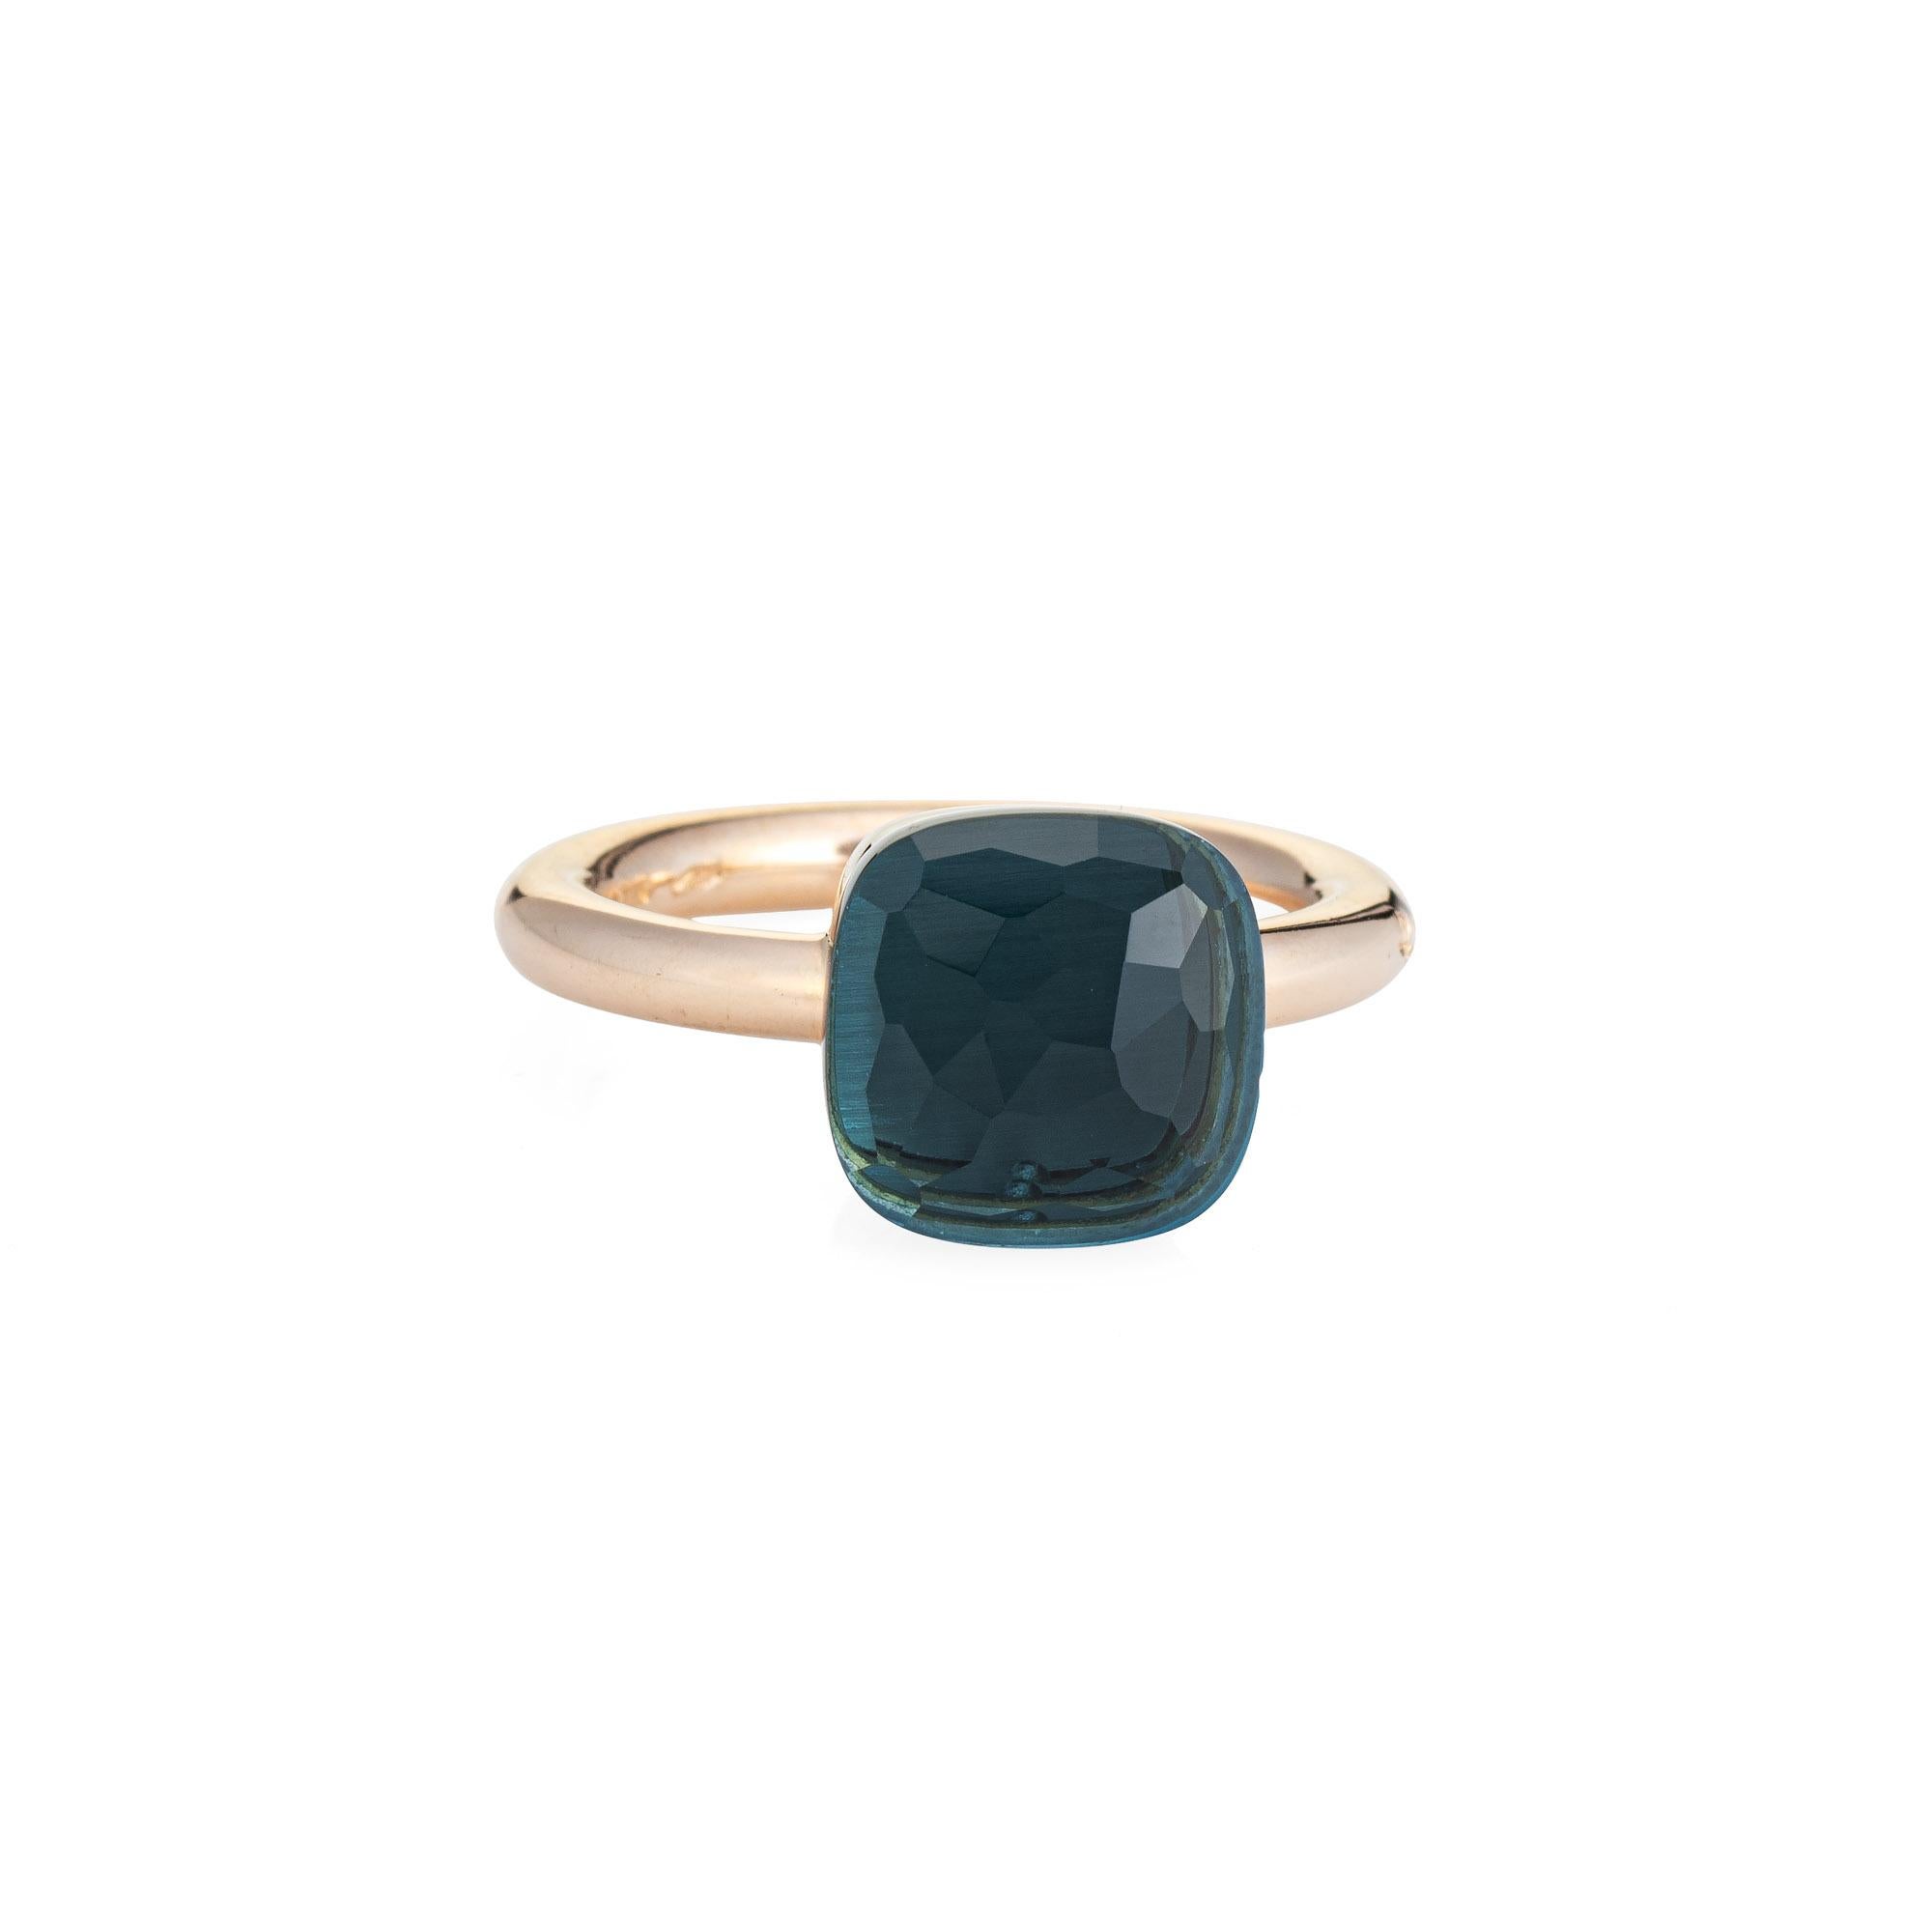 Finely detailed estate Pomellato London blue topaz Nudo ring, crafted in 18 karat yellow gold. 

Faceted London blue topaz measures 10.5mm x 10.5mm. The topaz is in good condition with a small chip evident under a 10x loupe.   

The ring is in good